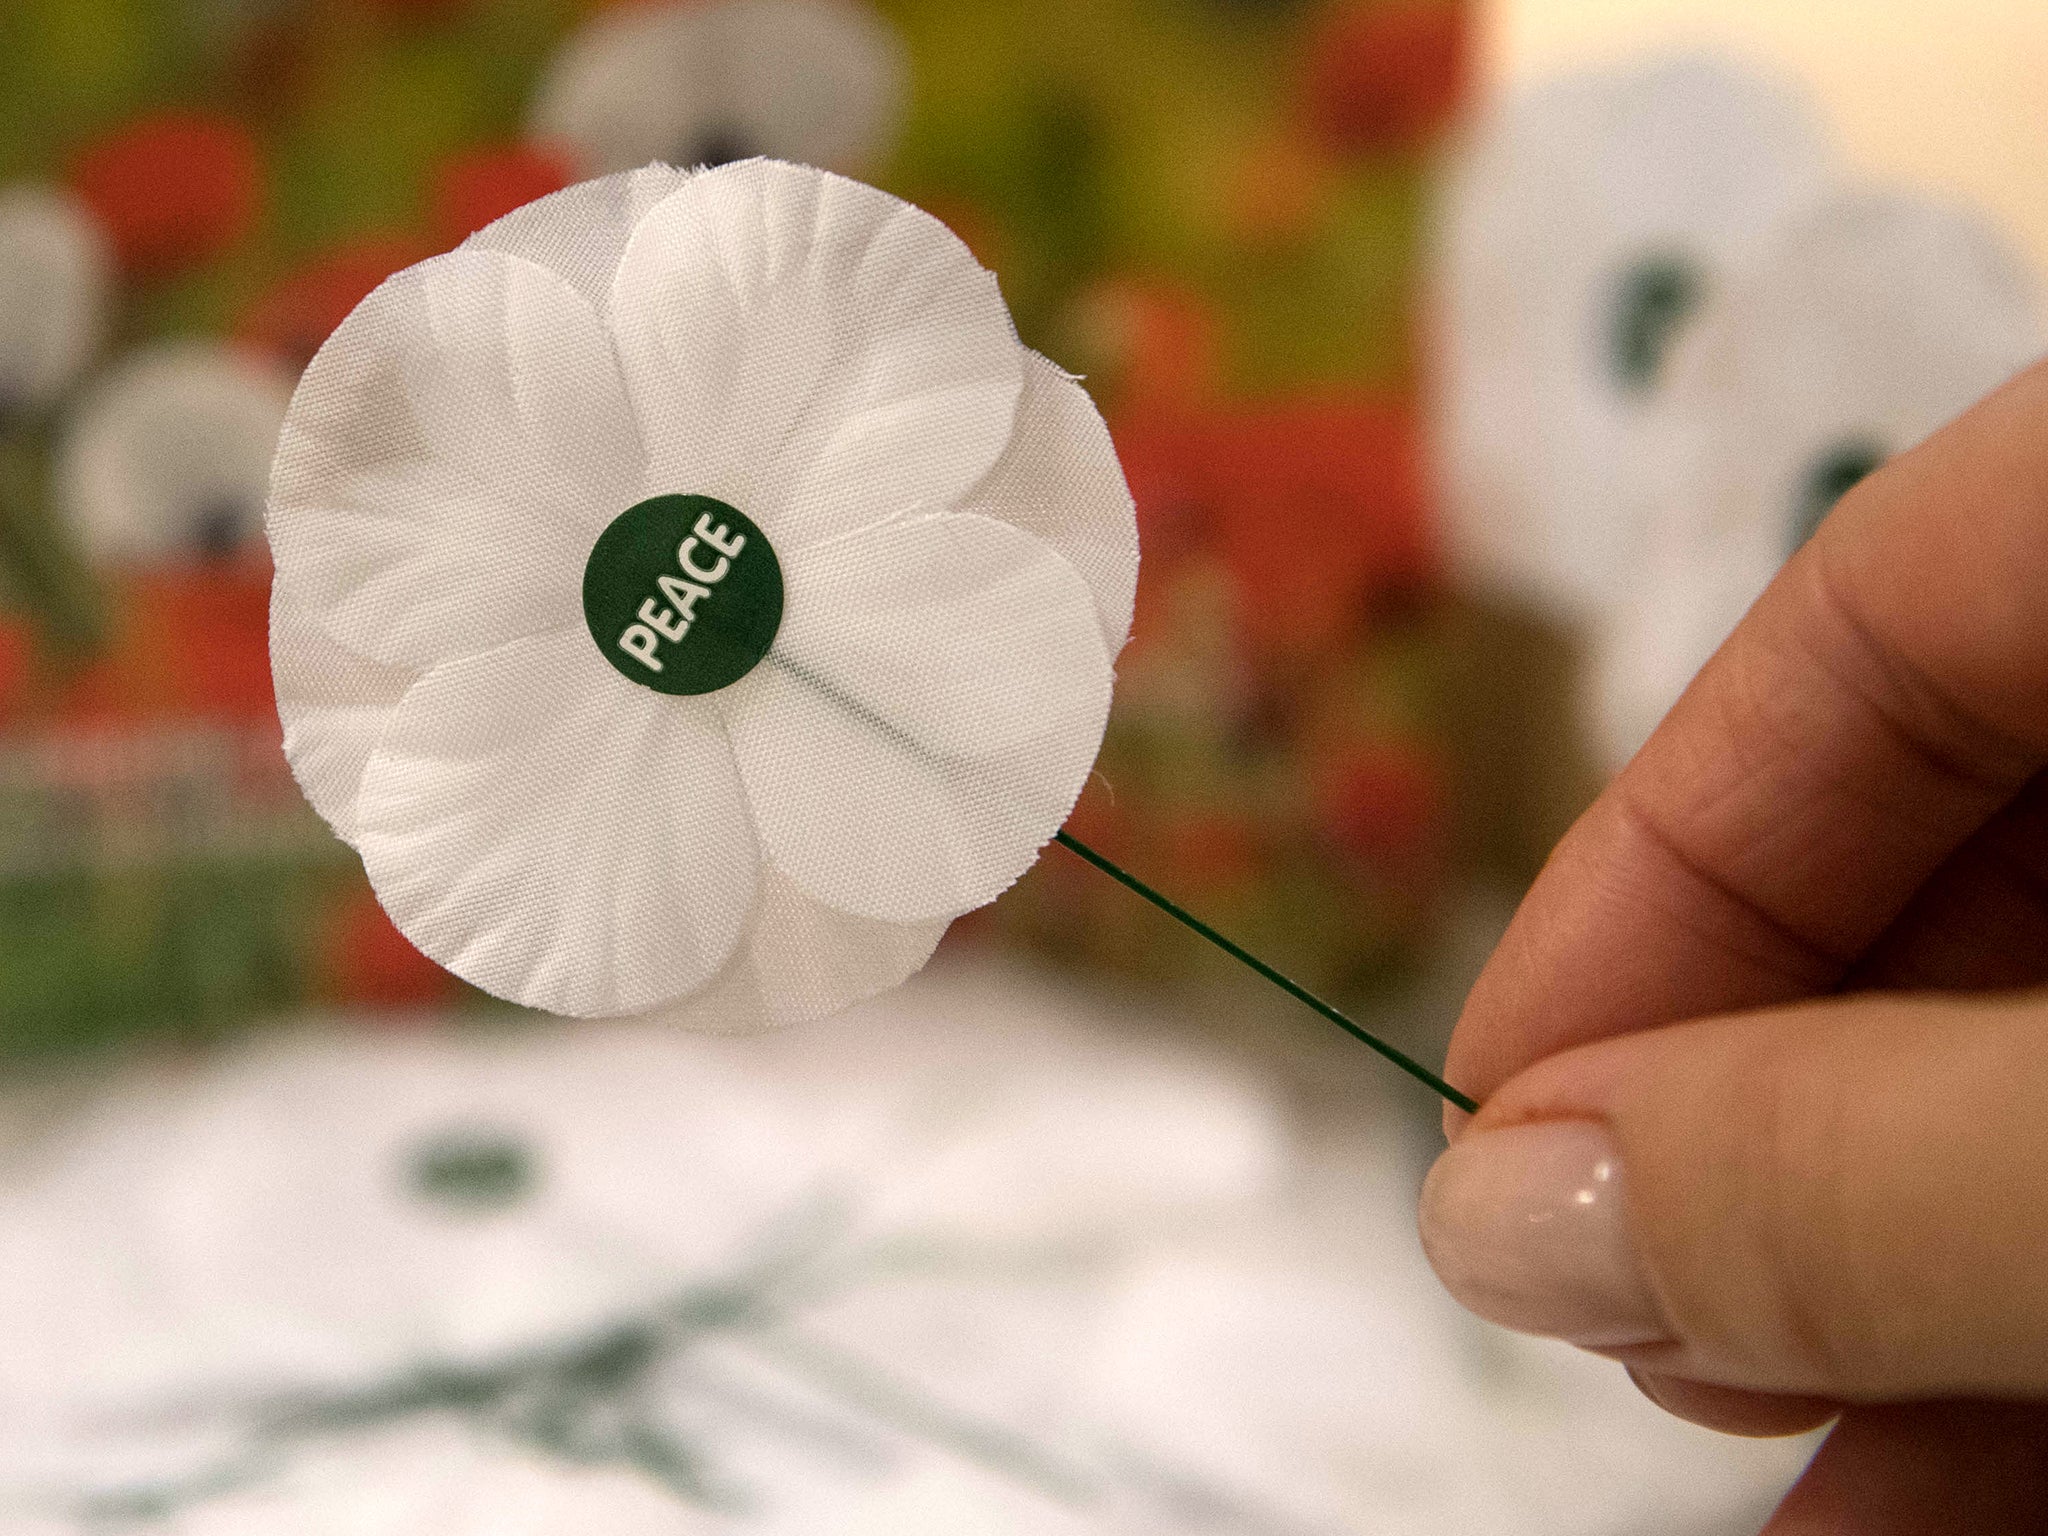 Military veterans demand Tory minister apologises for calling white poppies &apos;attention seeking rubbish&apos;